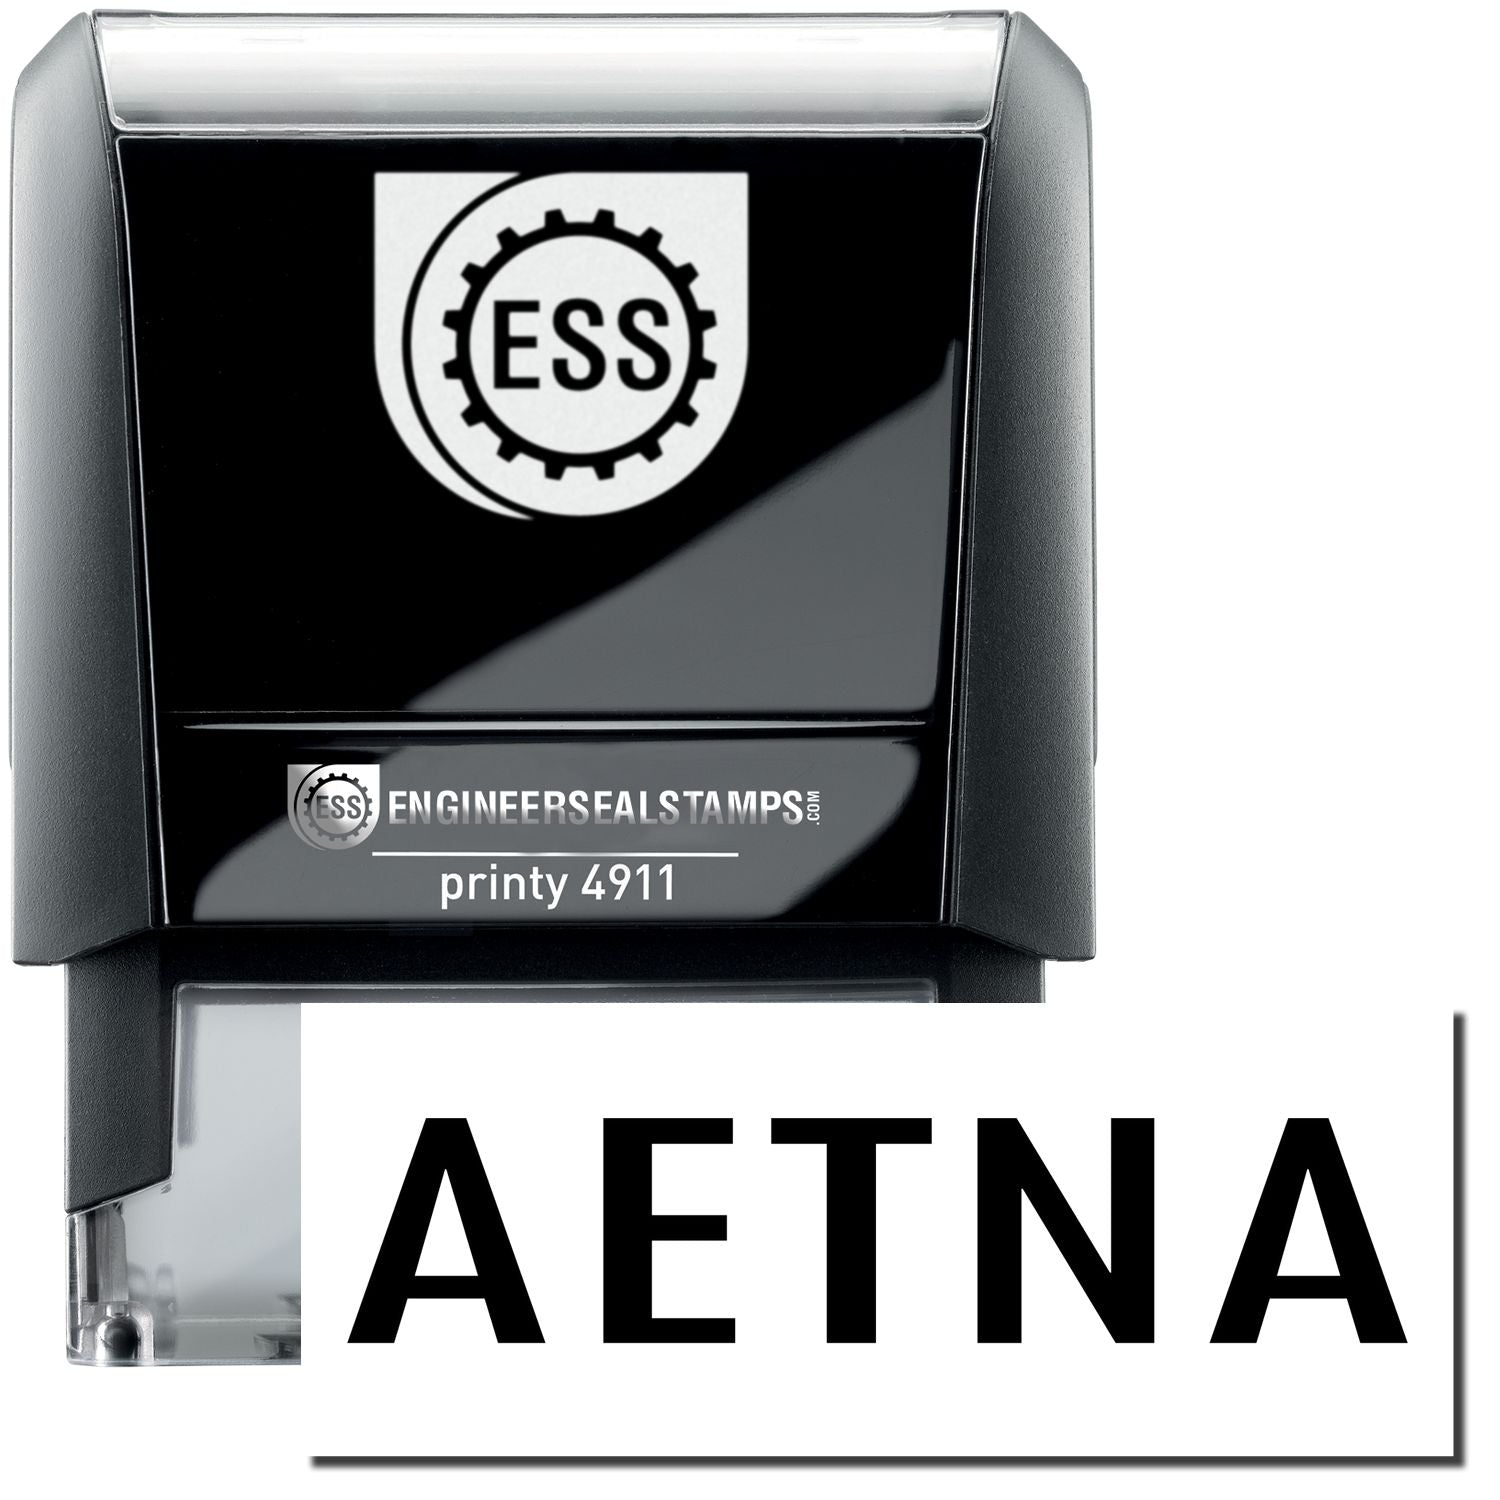 A self-inking stamp with a stamped image showing how the text "AETNA" is displayed after stamping.